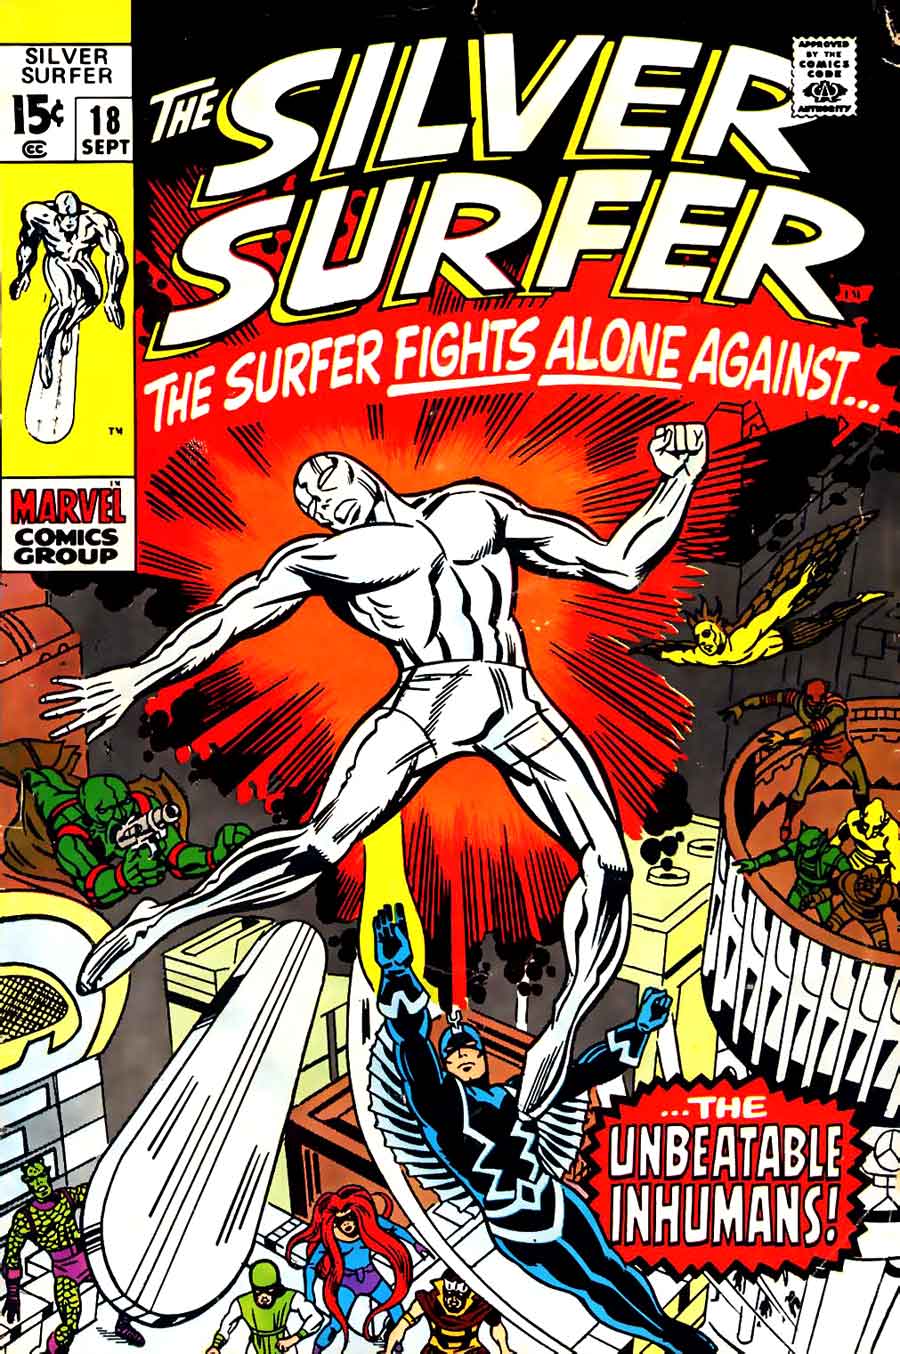 Silver Surfer v1 #18 marvel comic book cover art by Jack Kirby